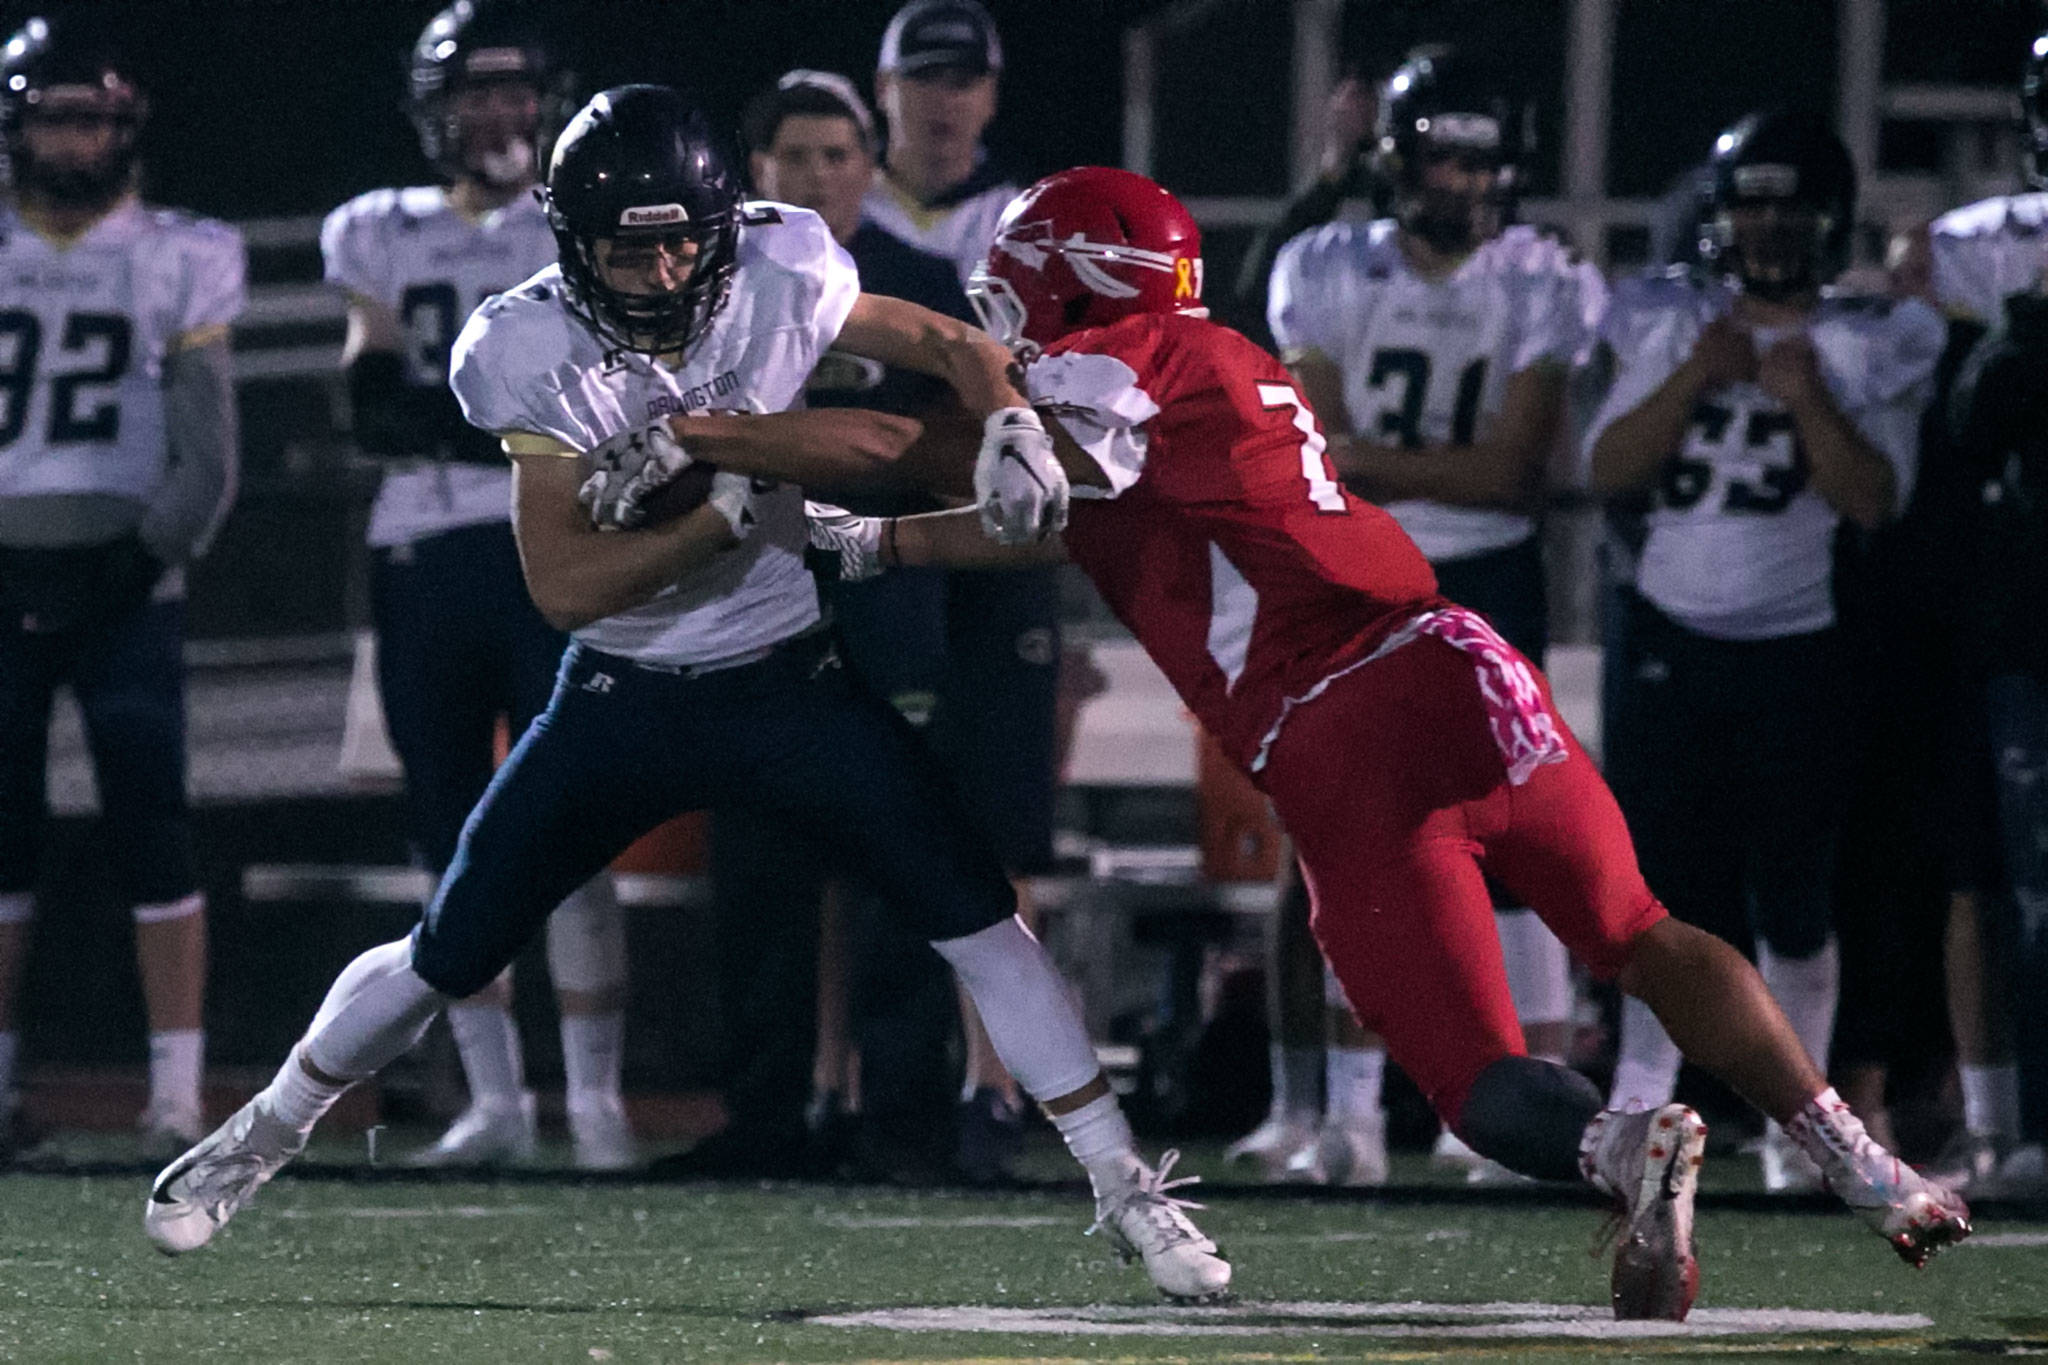 Arlington’s Bryce Petersen makes a reception with Marysville Pilchuck’s Jared Kelly defending on Friday night at Quil Ceda Stadium in Marysville.. (Kevin Clark / The Herald)